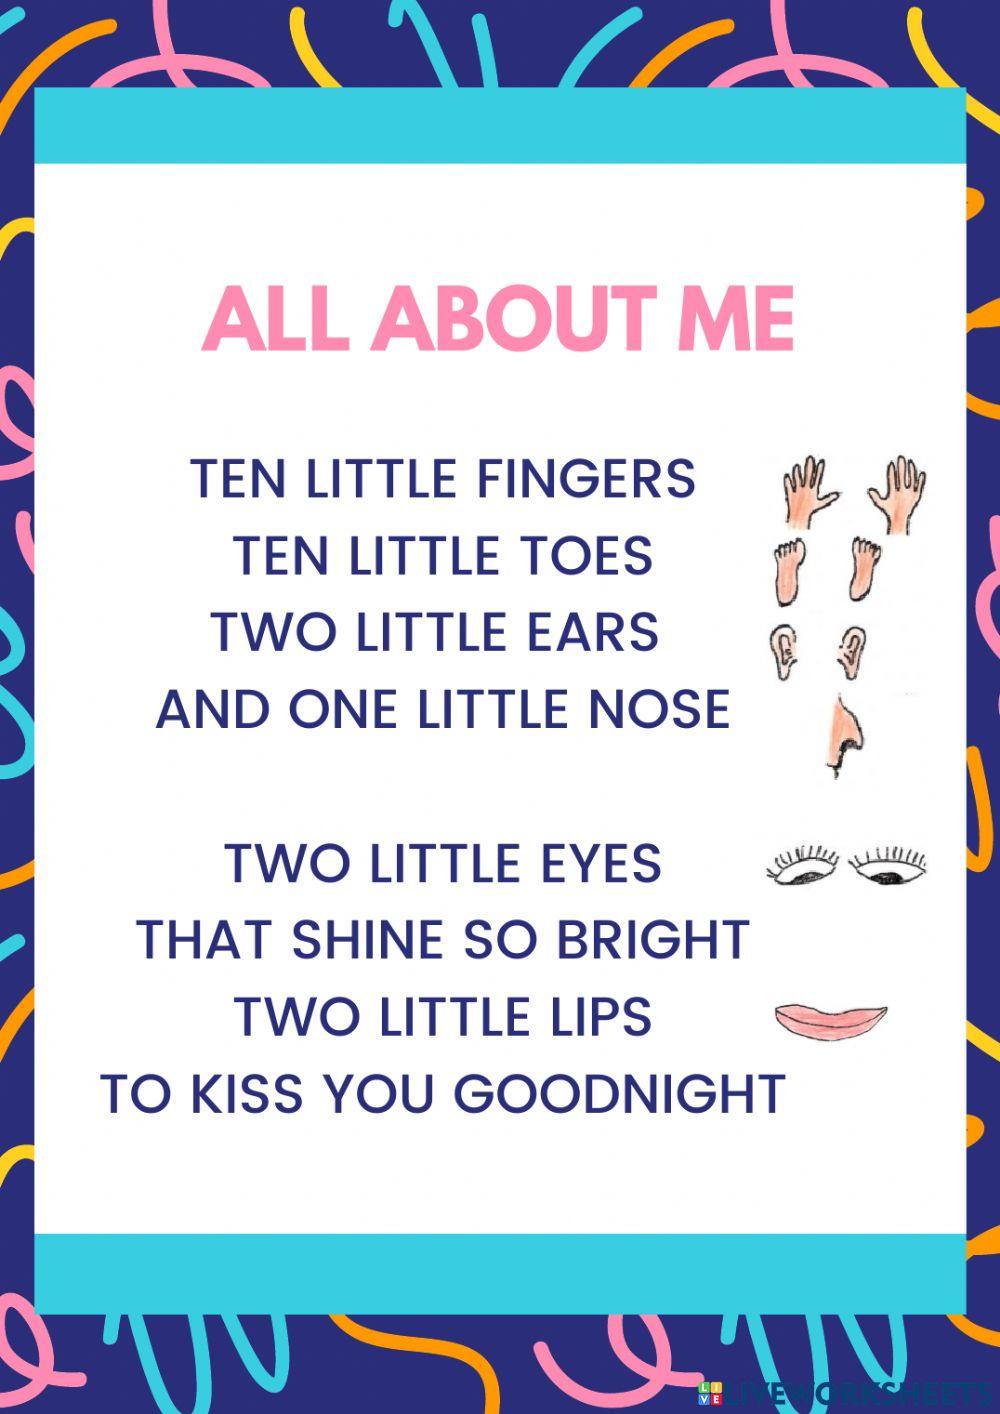 All about me poem